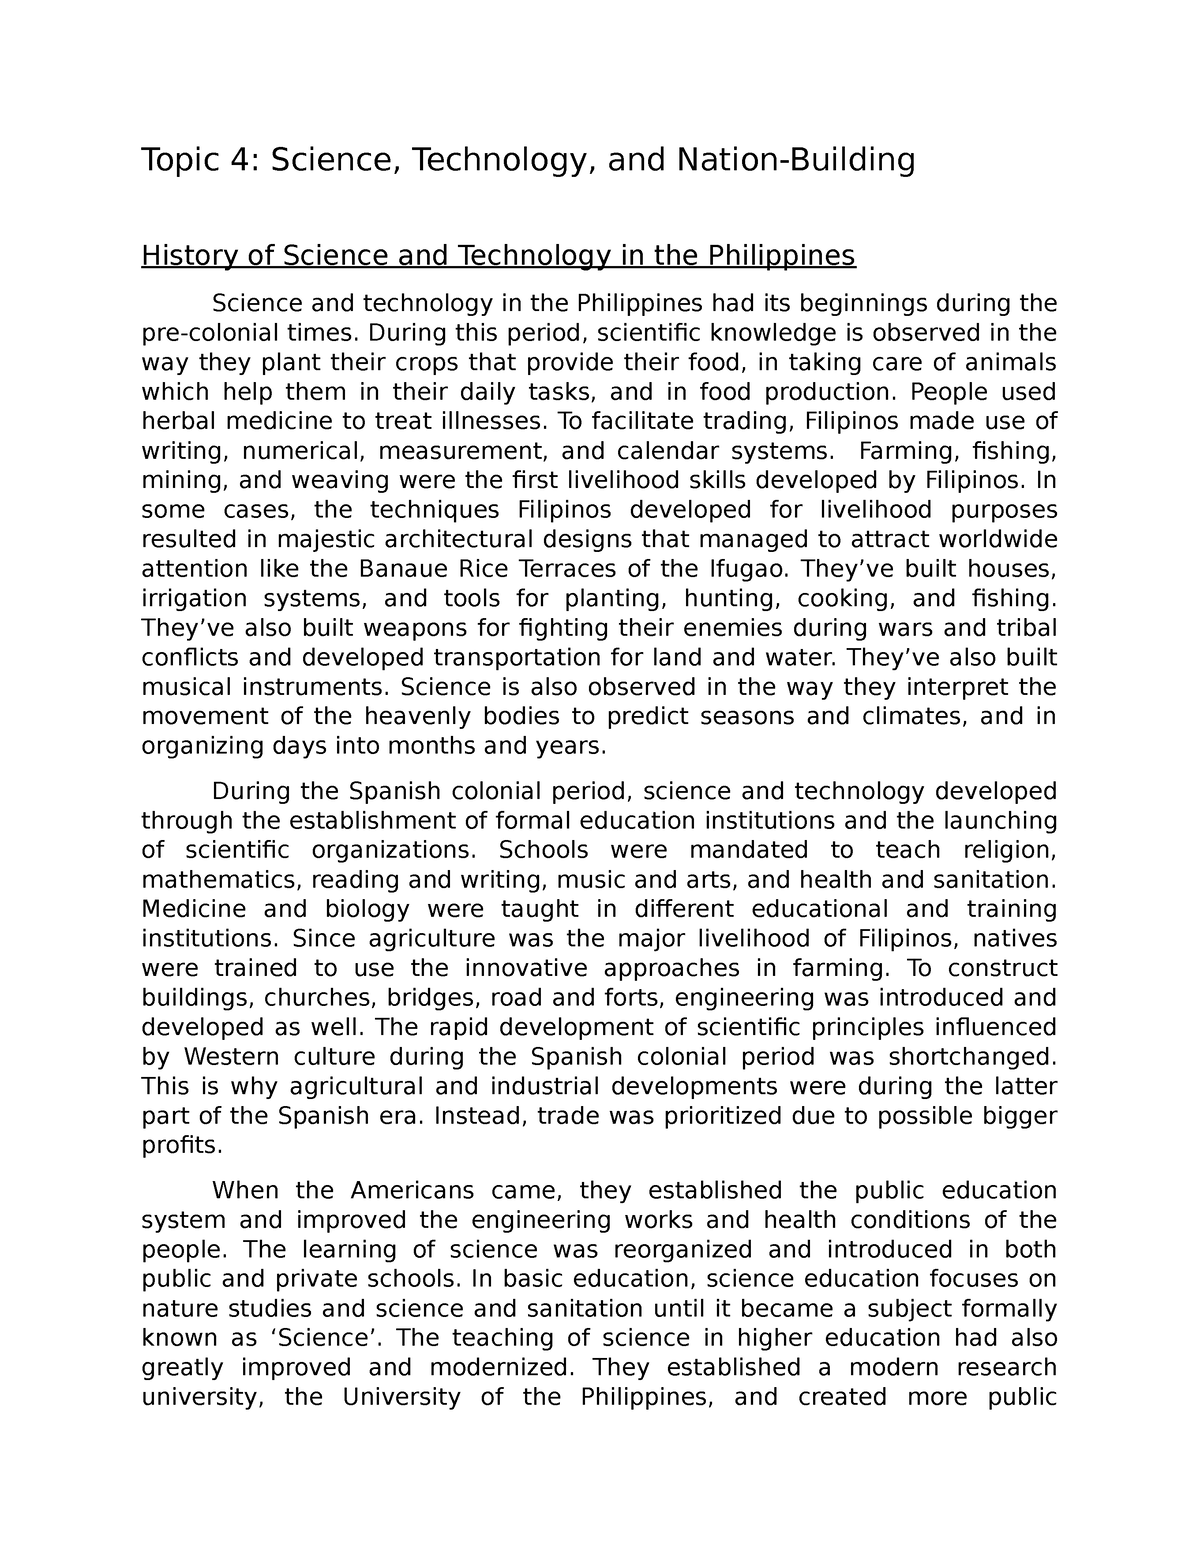 essay on science and technology for nation development